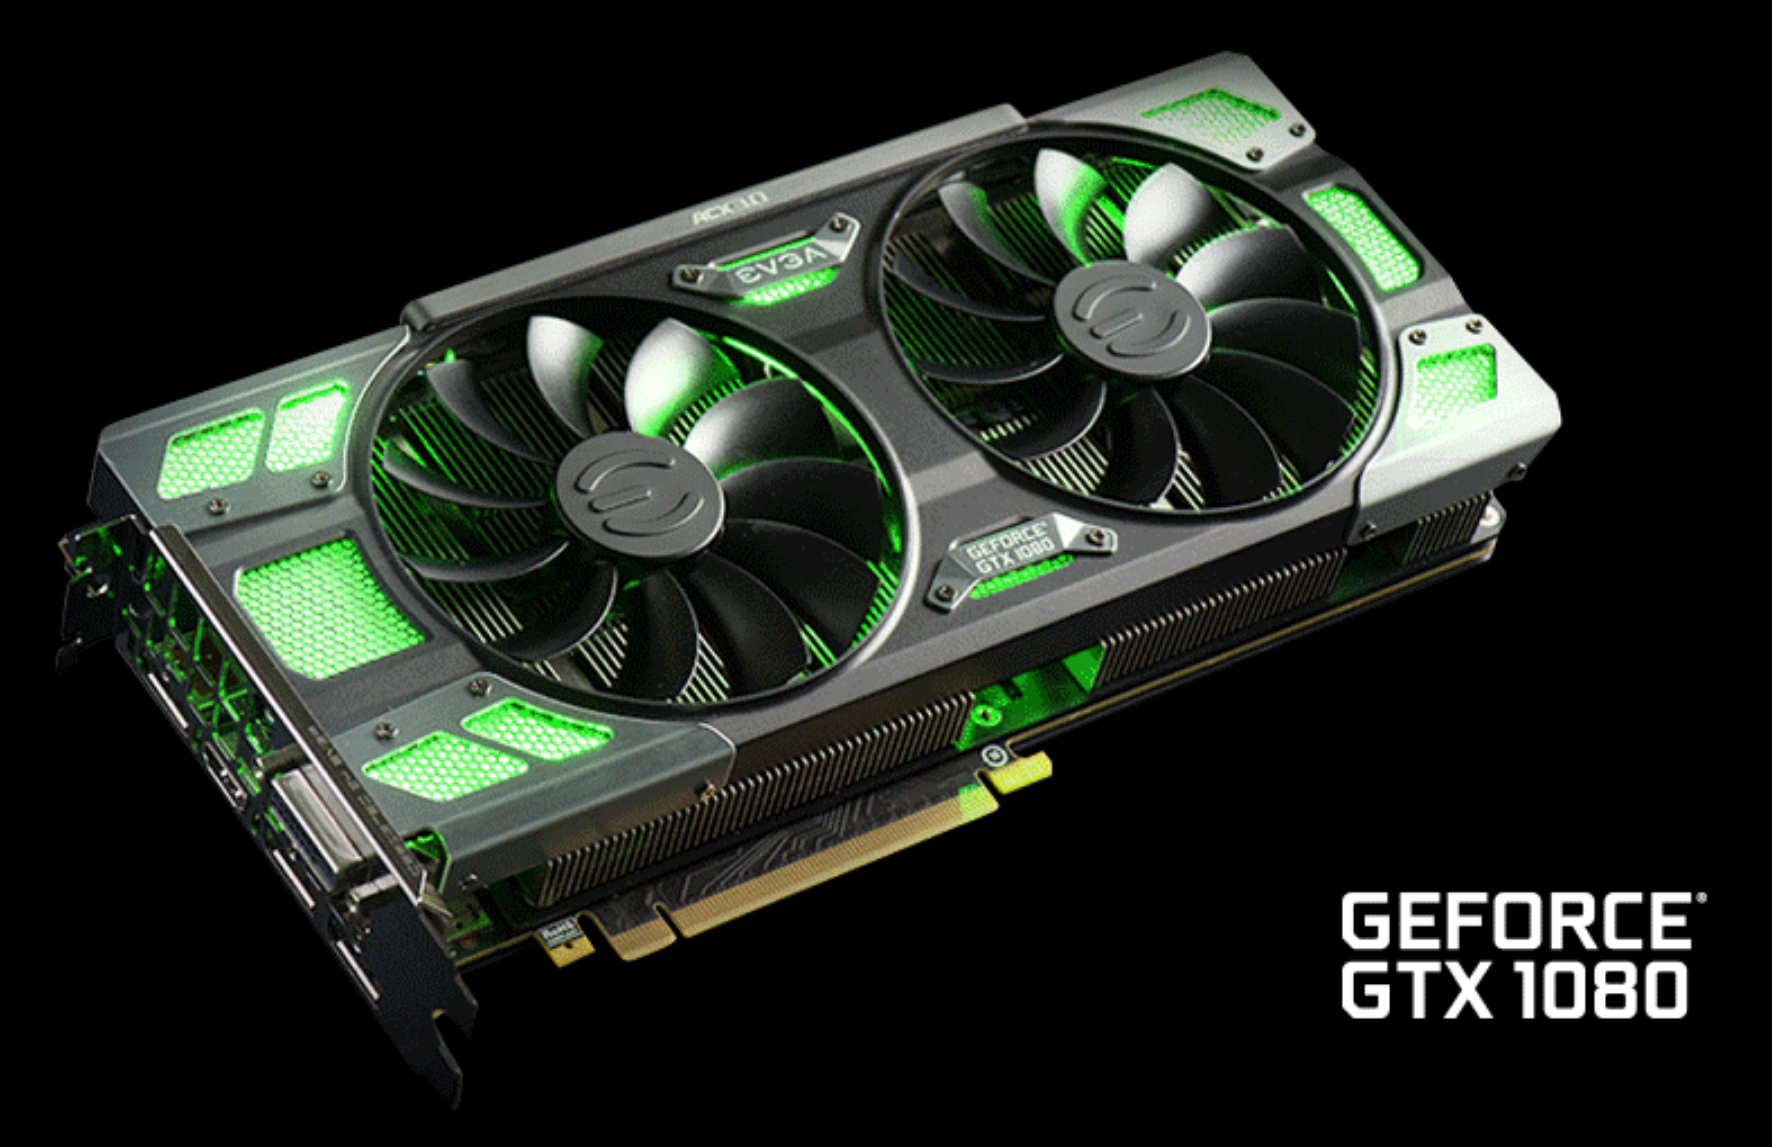 Nvidia's GeForce GTX 1080 launches with 